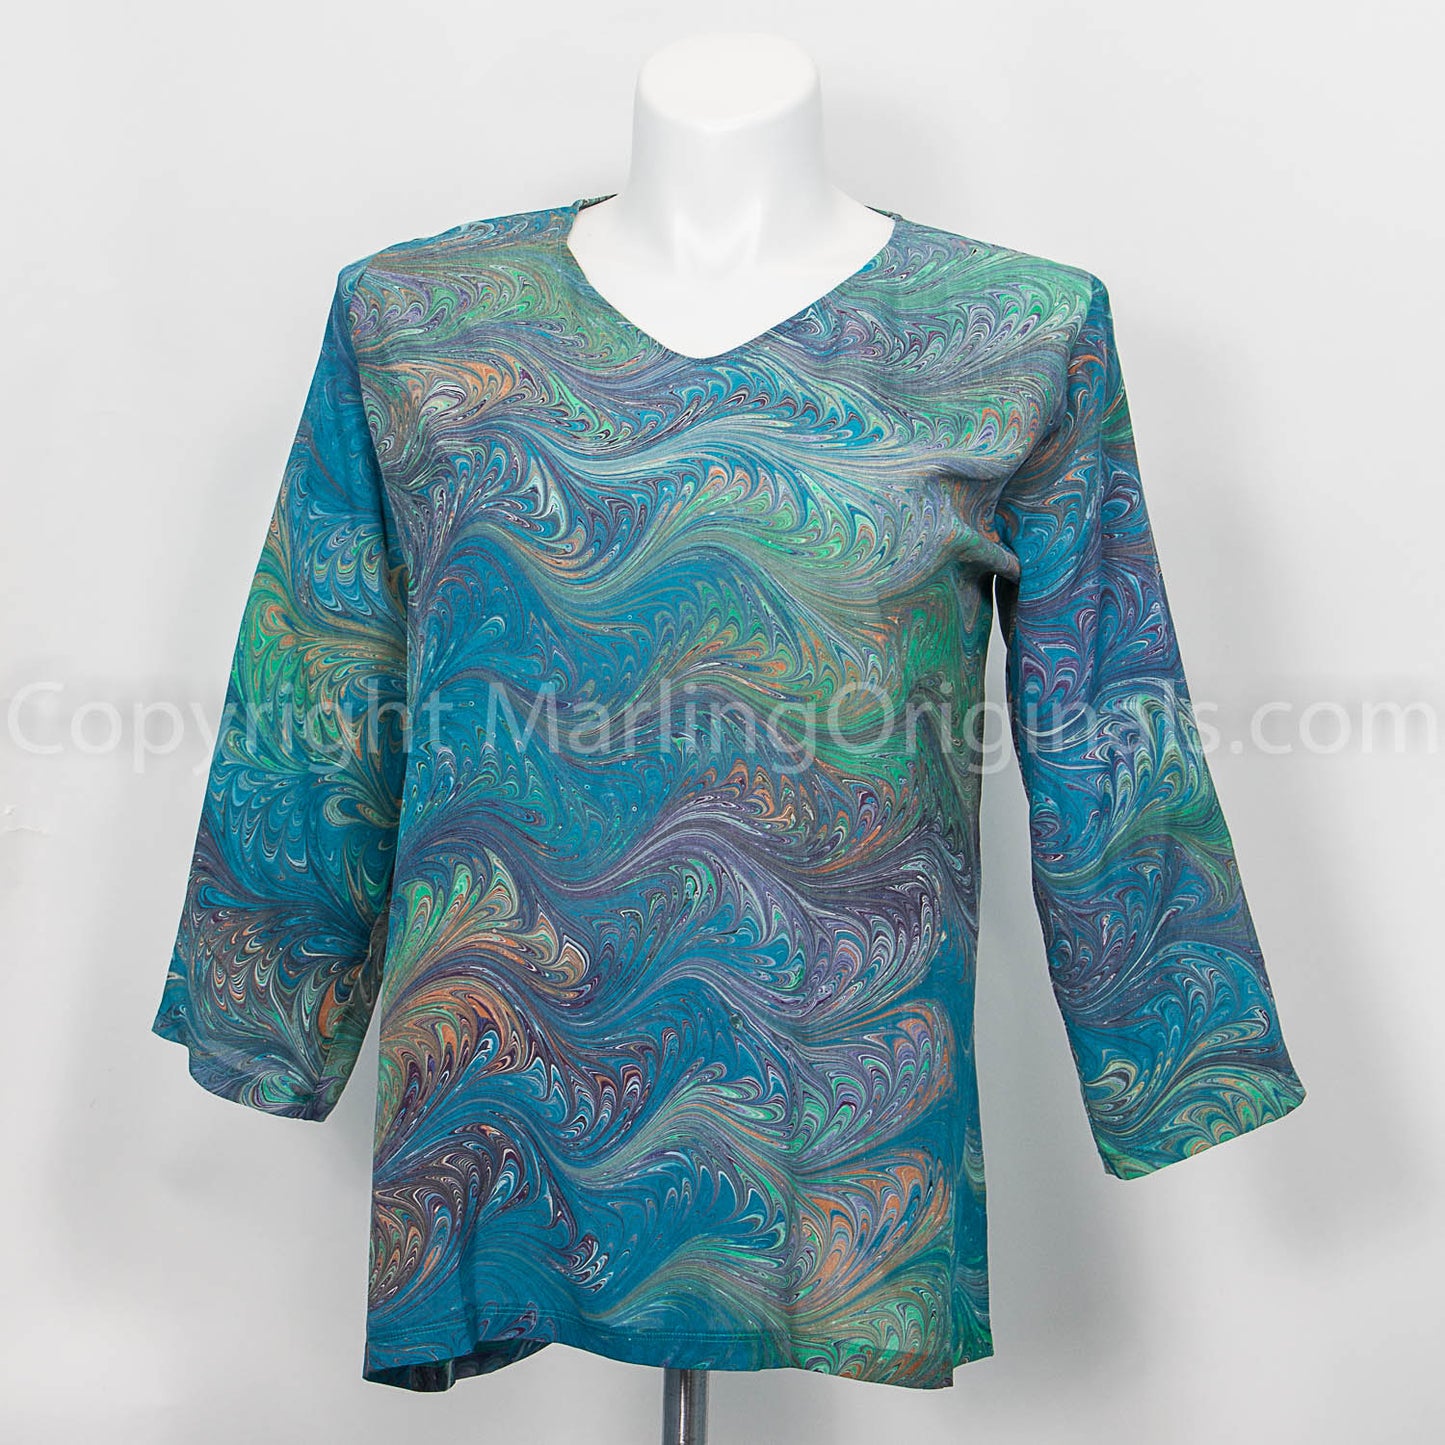 fall green tones hand marbled.  Silk crepe tunic with notched neck, 3/4 sleeves, side slit